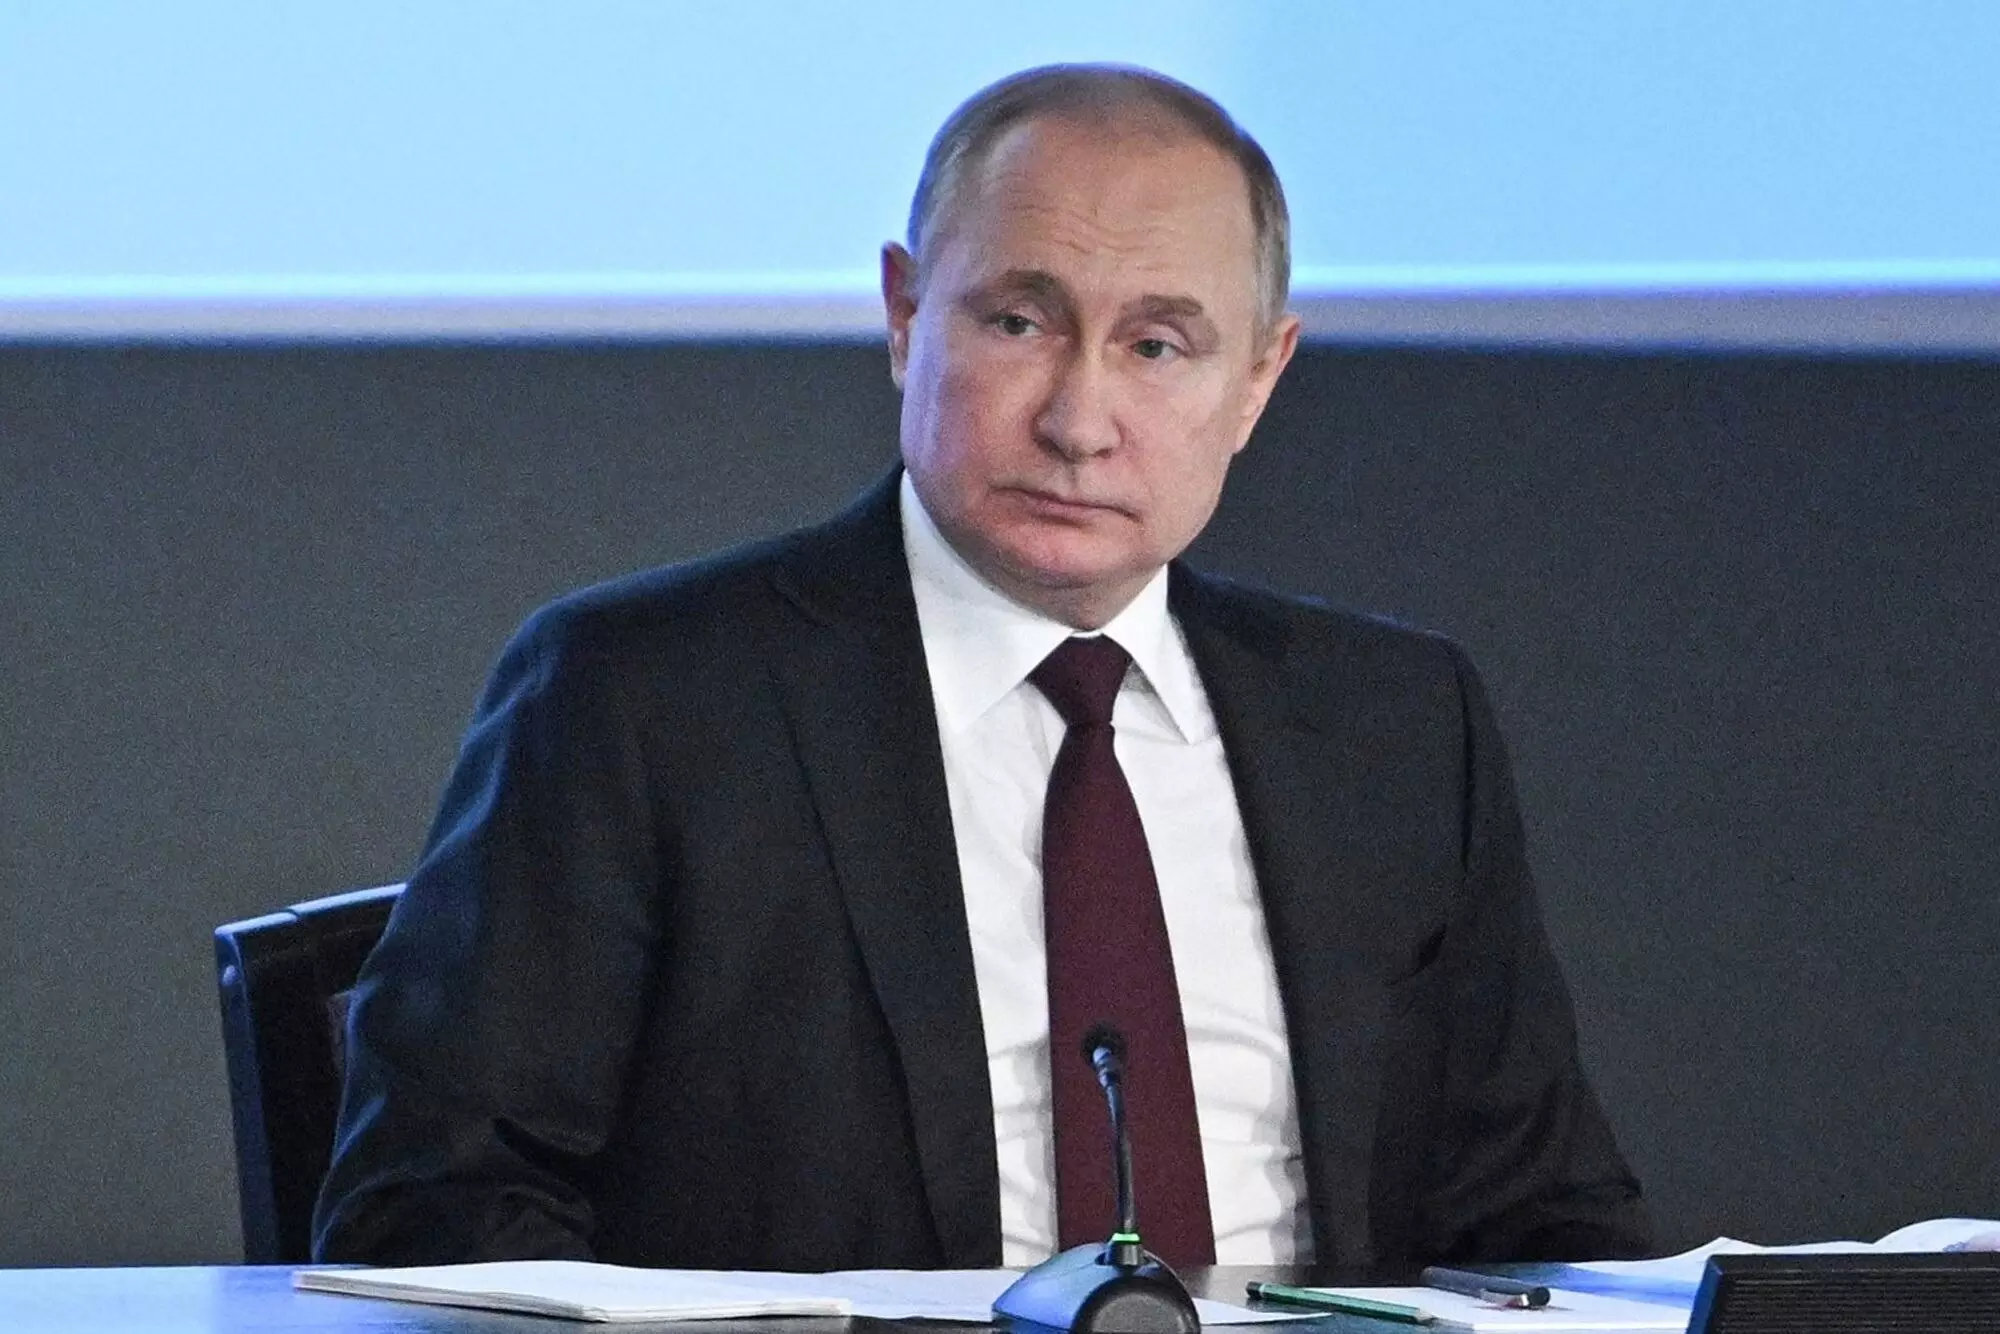 Putin says there will be no peace in Ukraine until Russias goals, still unchanged, are achieved